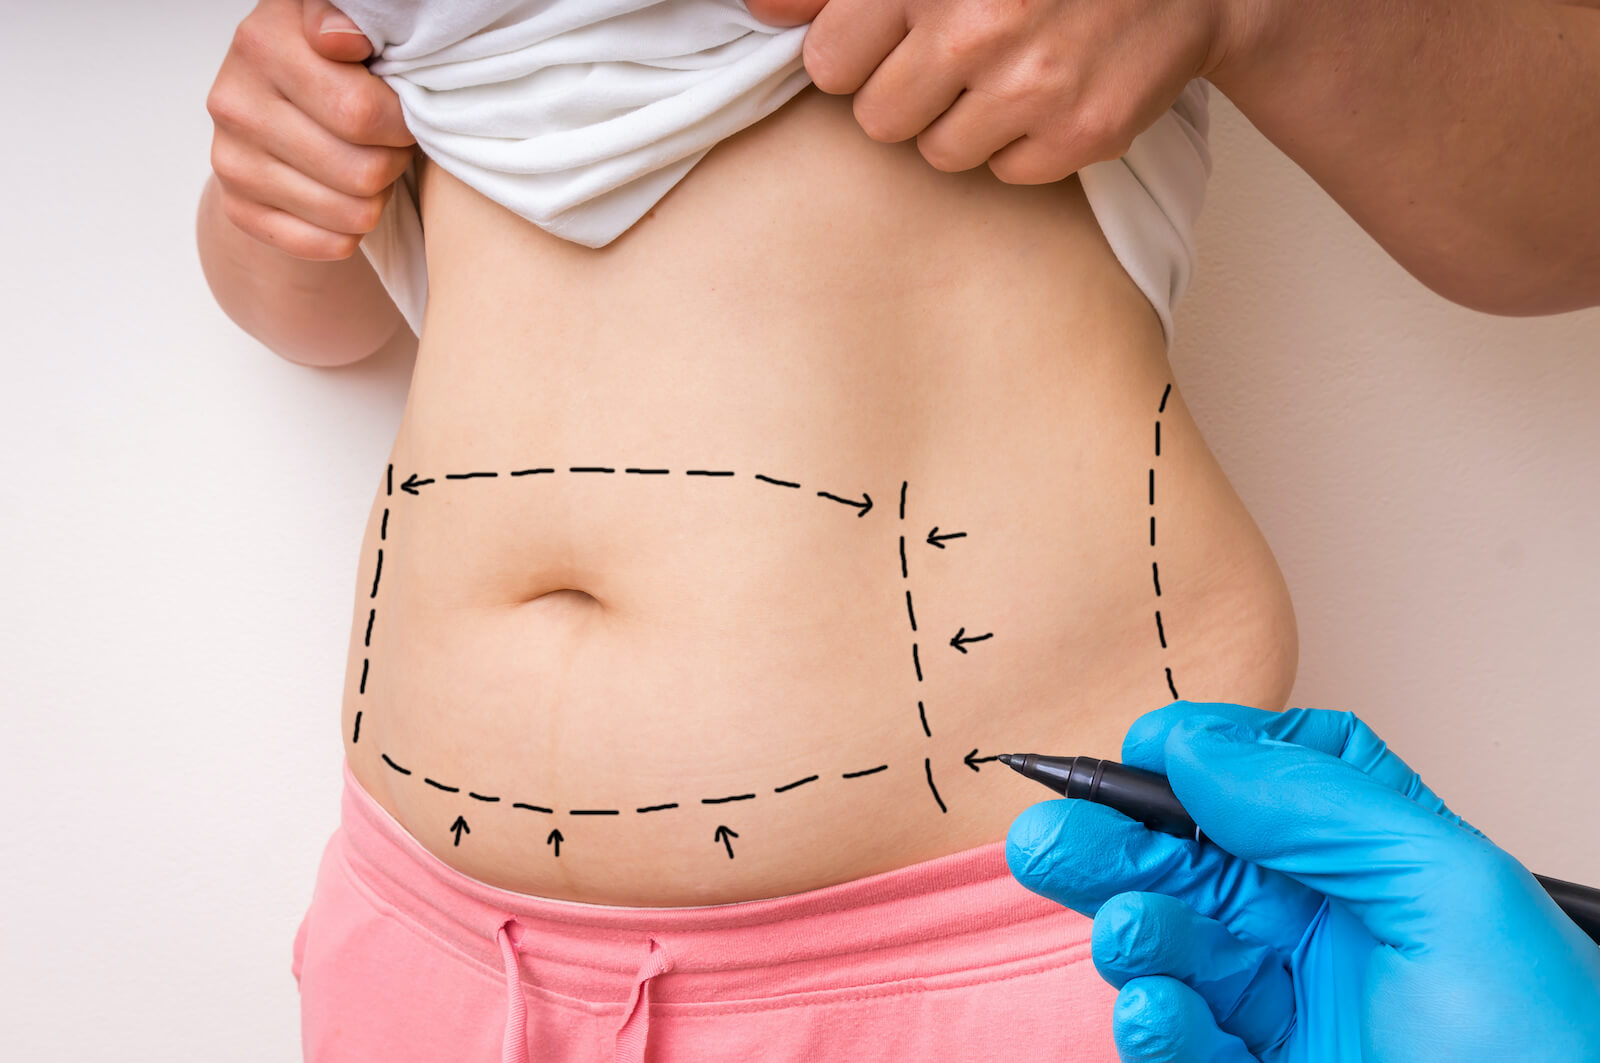 Lines Drawn on Woman's Abdomen for Tummy Tuck Surgery